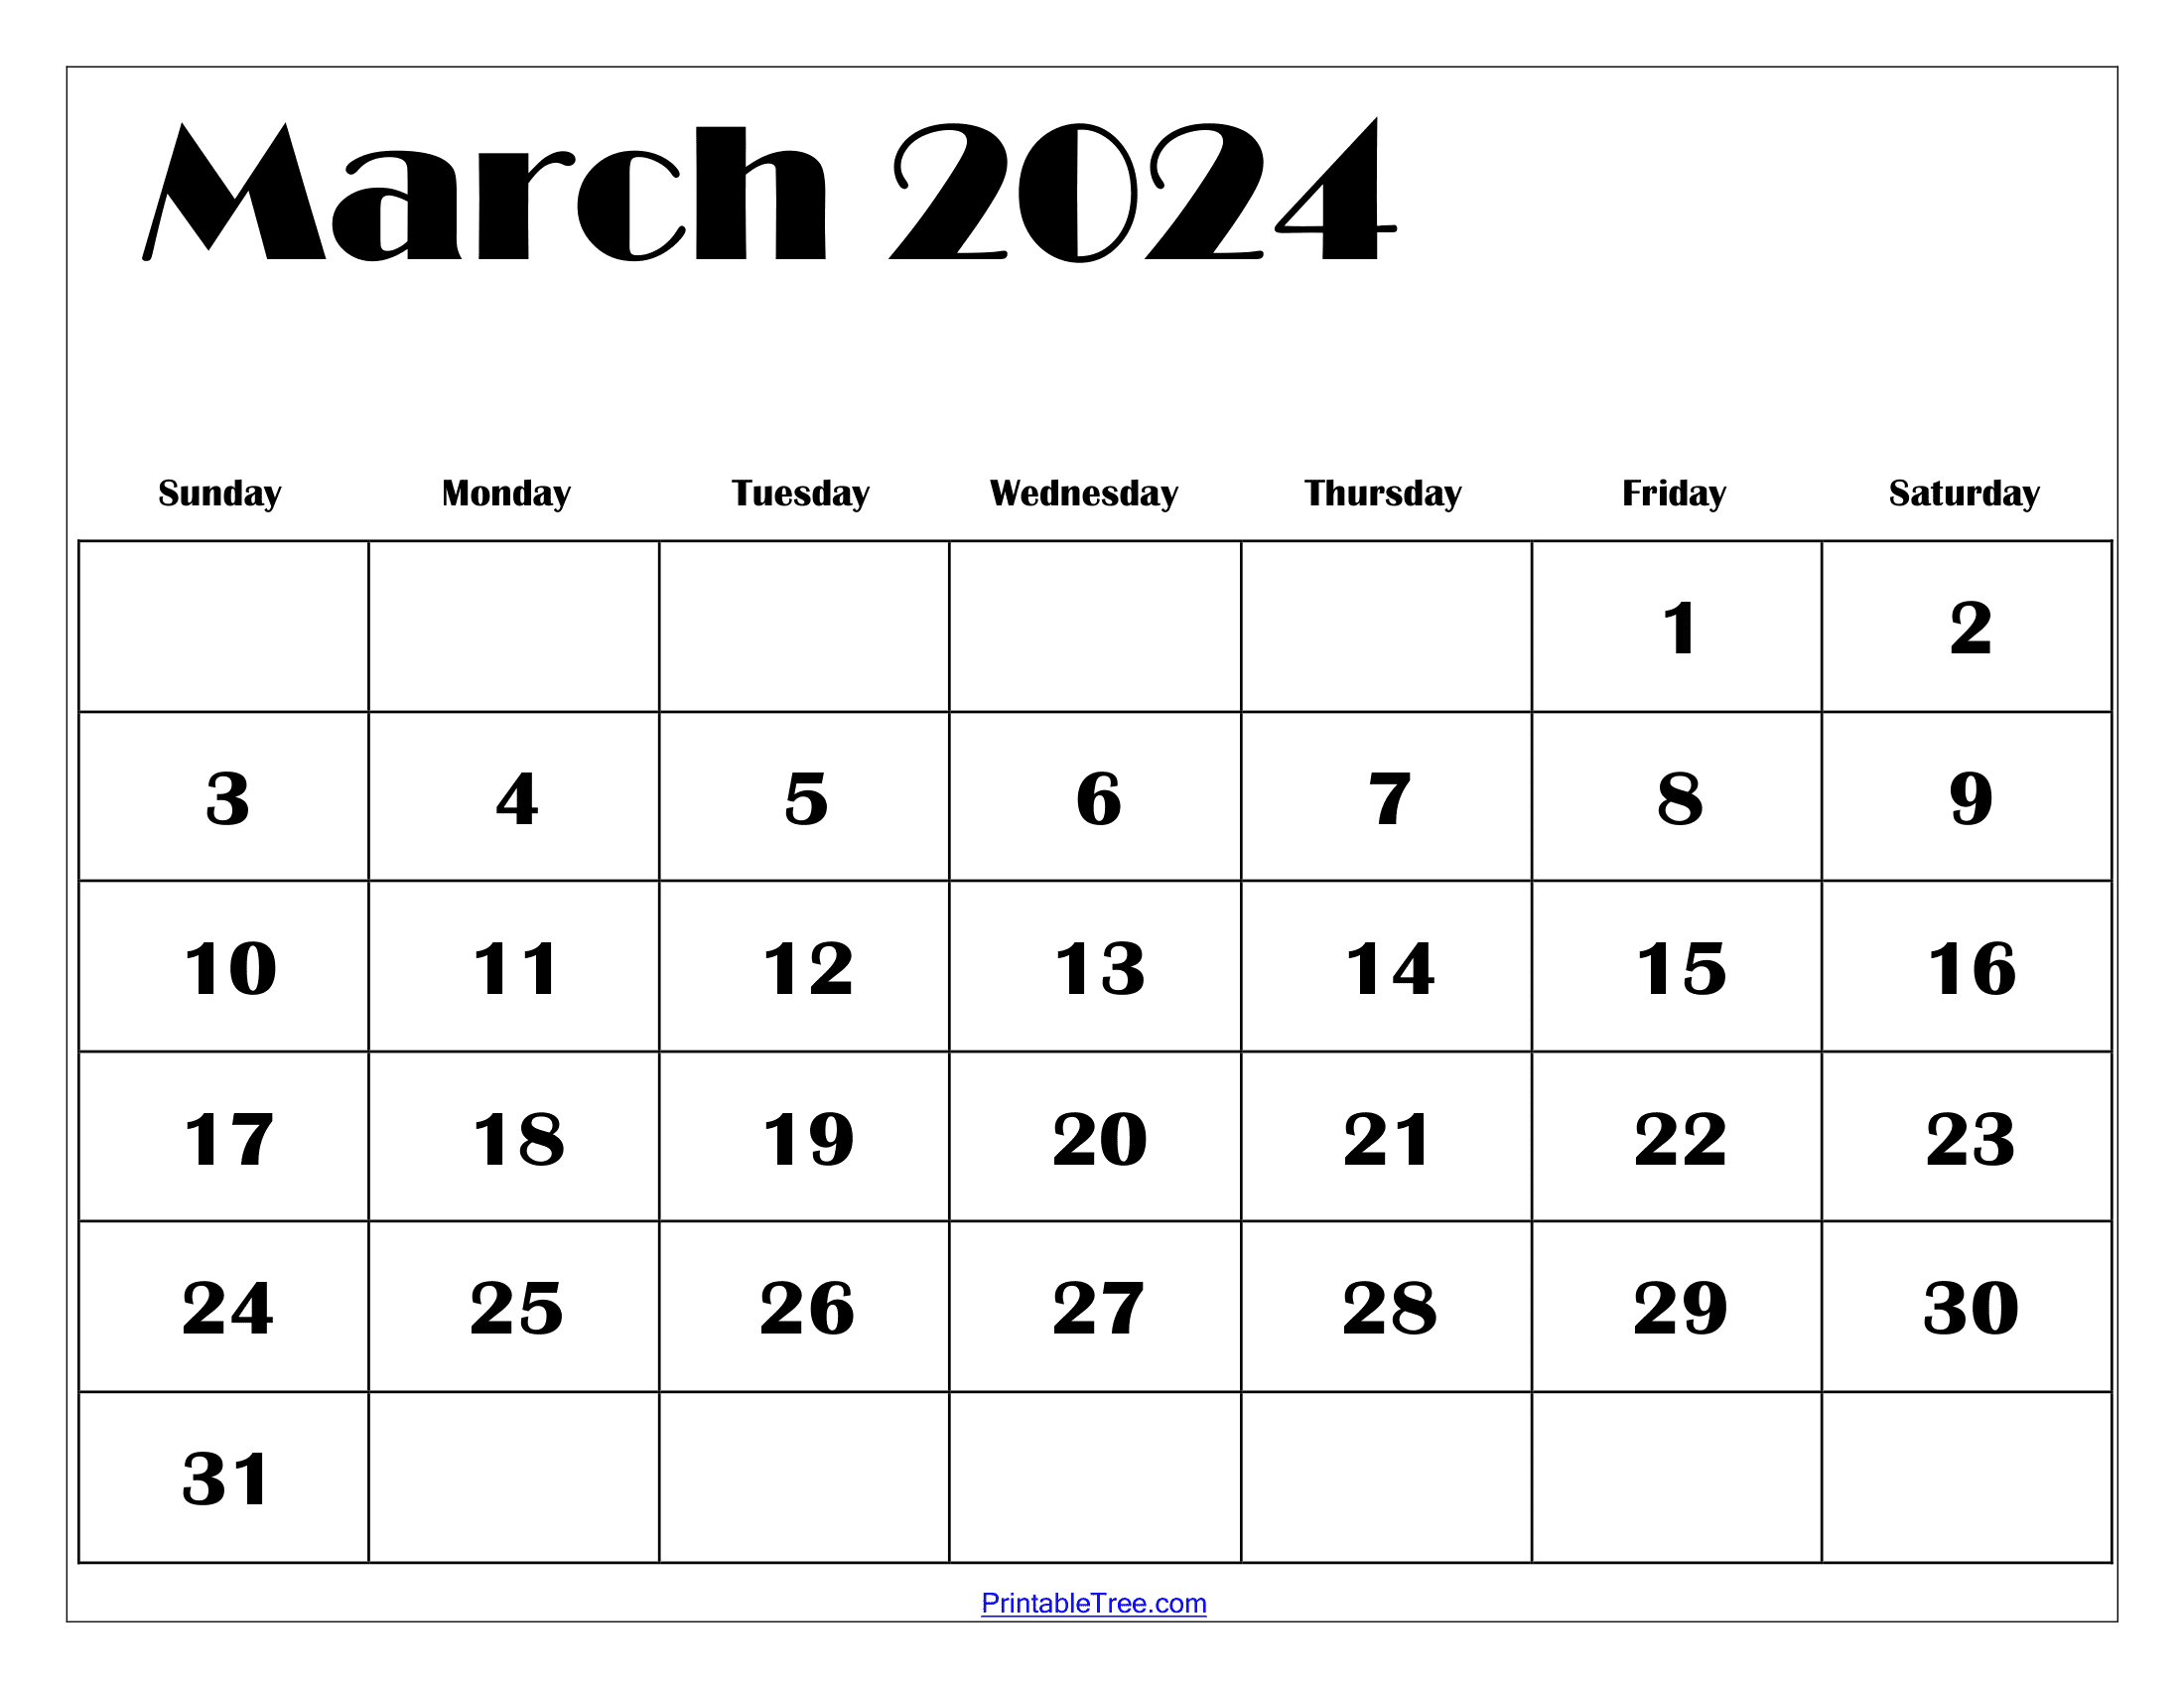 March 2024 Calendar Printable Pdf With Holidays Template Free for Blank Calendar Printable March 2024